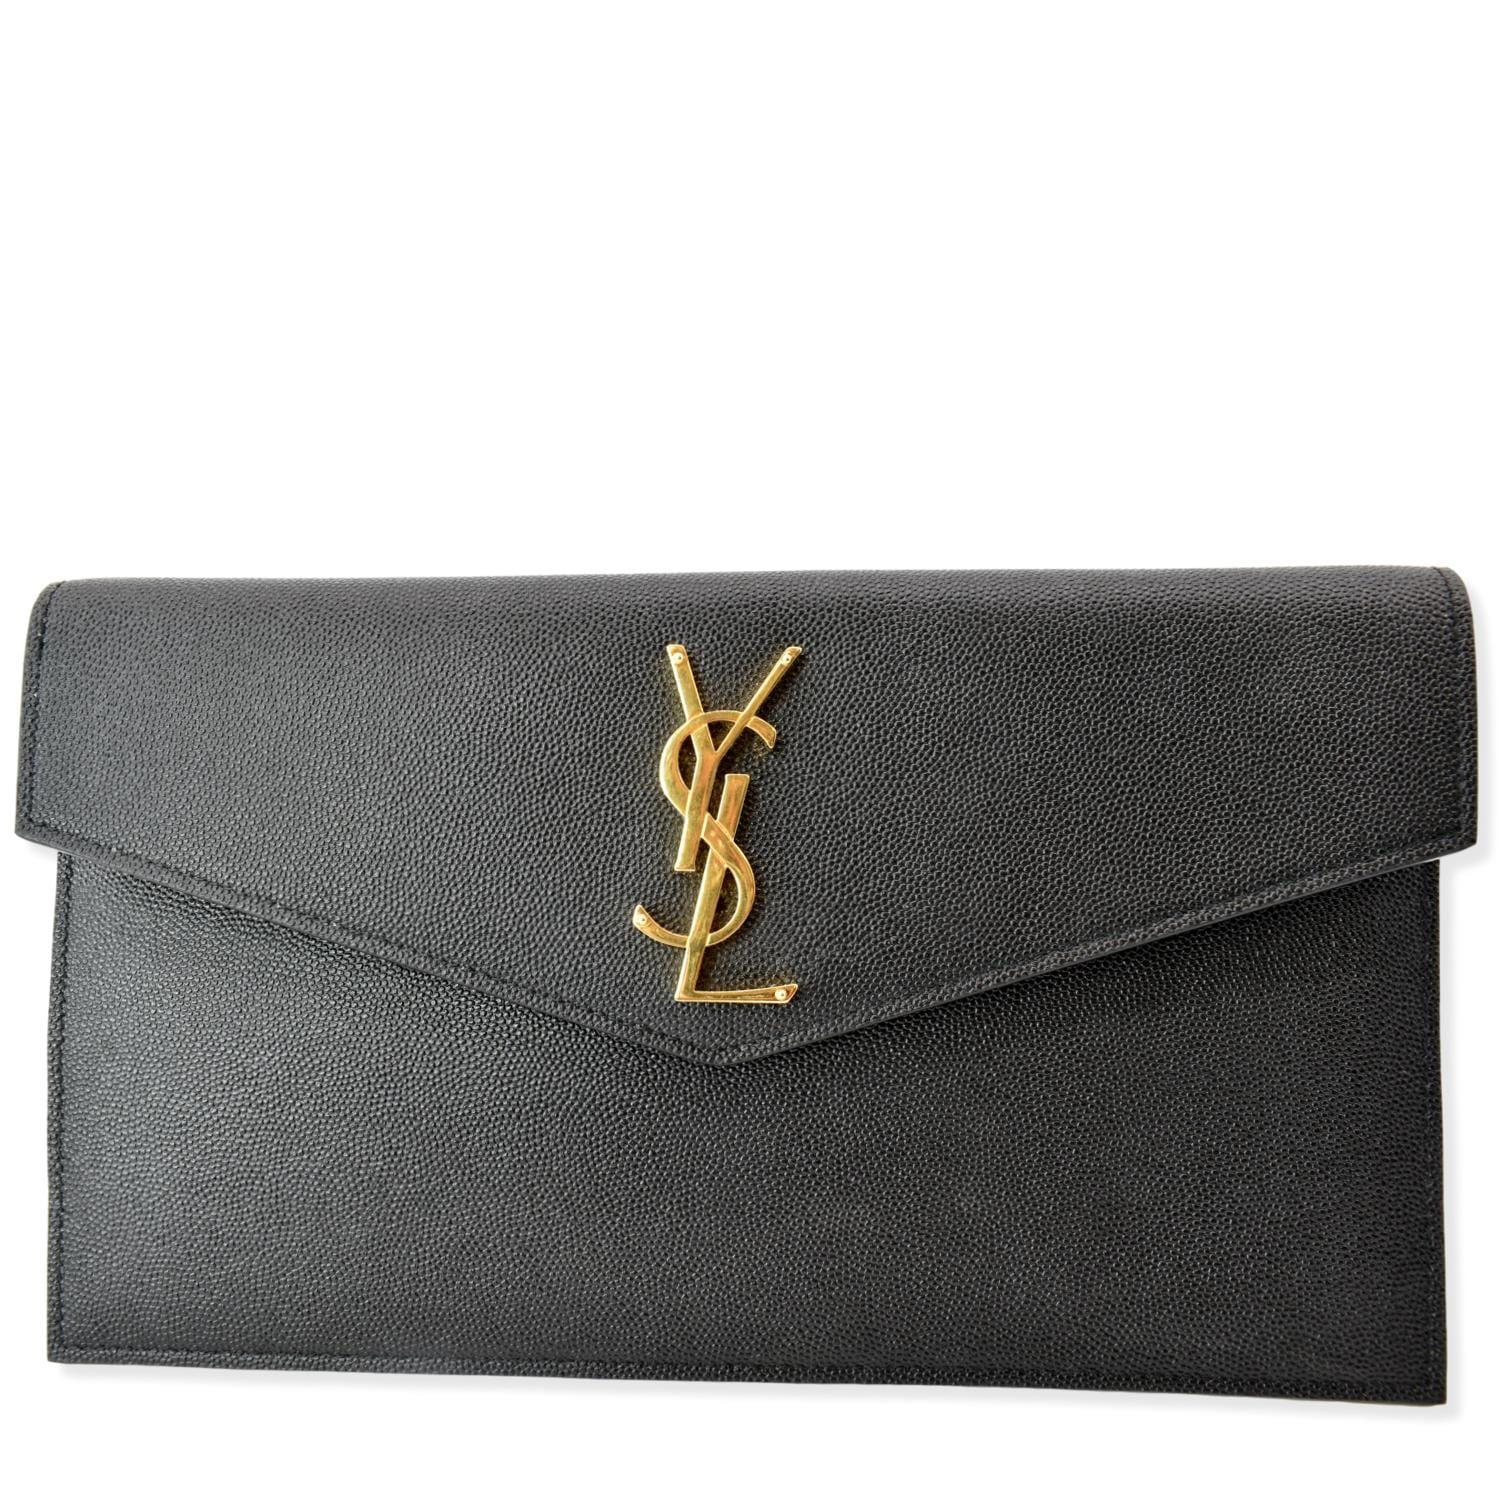 Saint Laurent 'Uptown Baby Small' clutch with logo